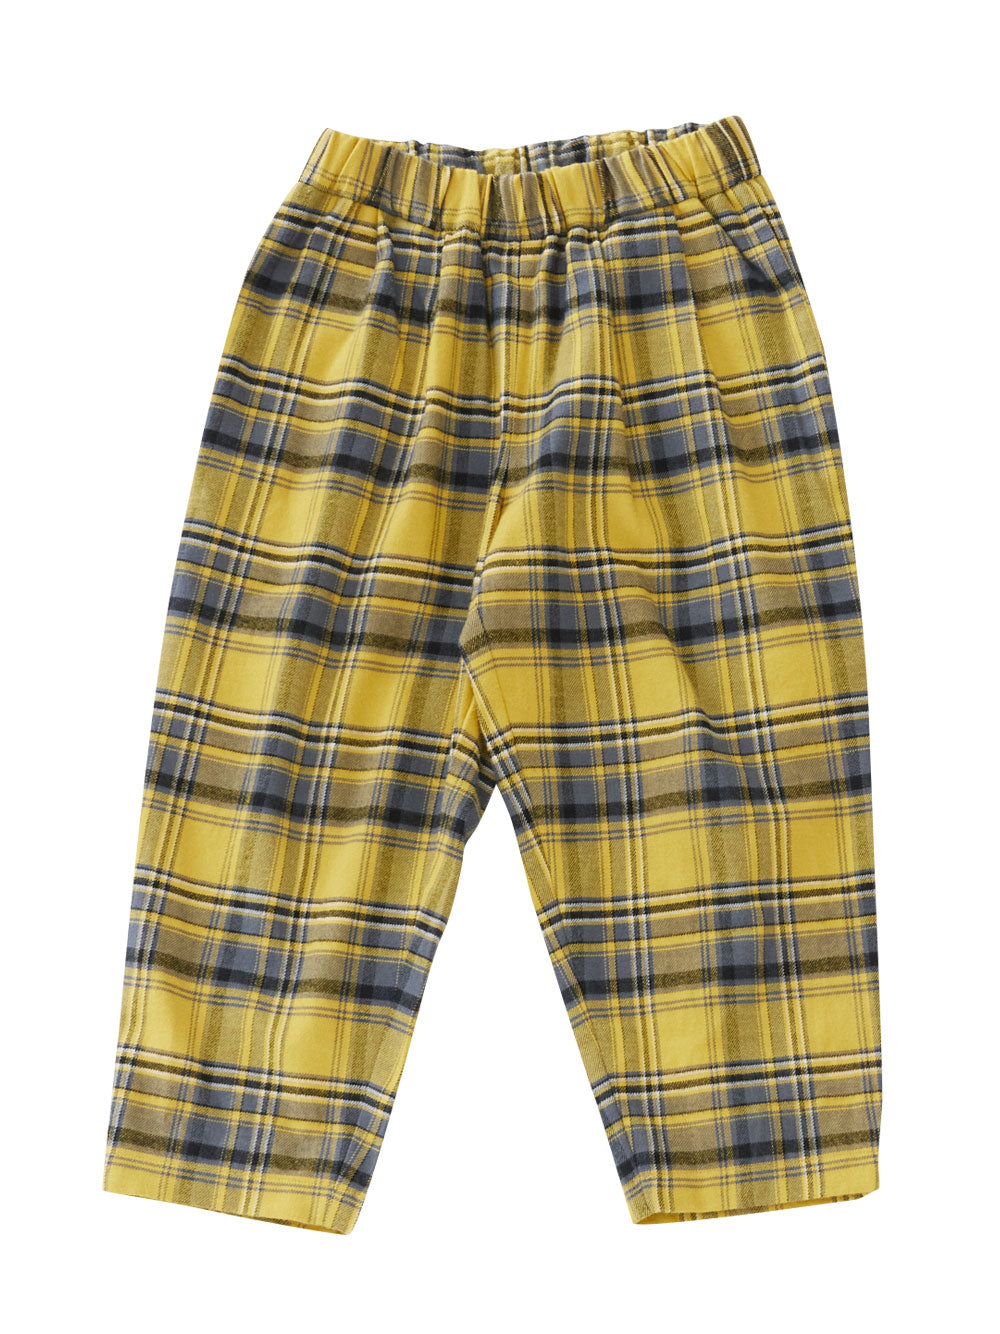 Yellow x Black Checked Trousers